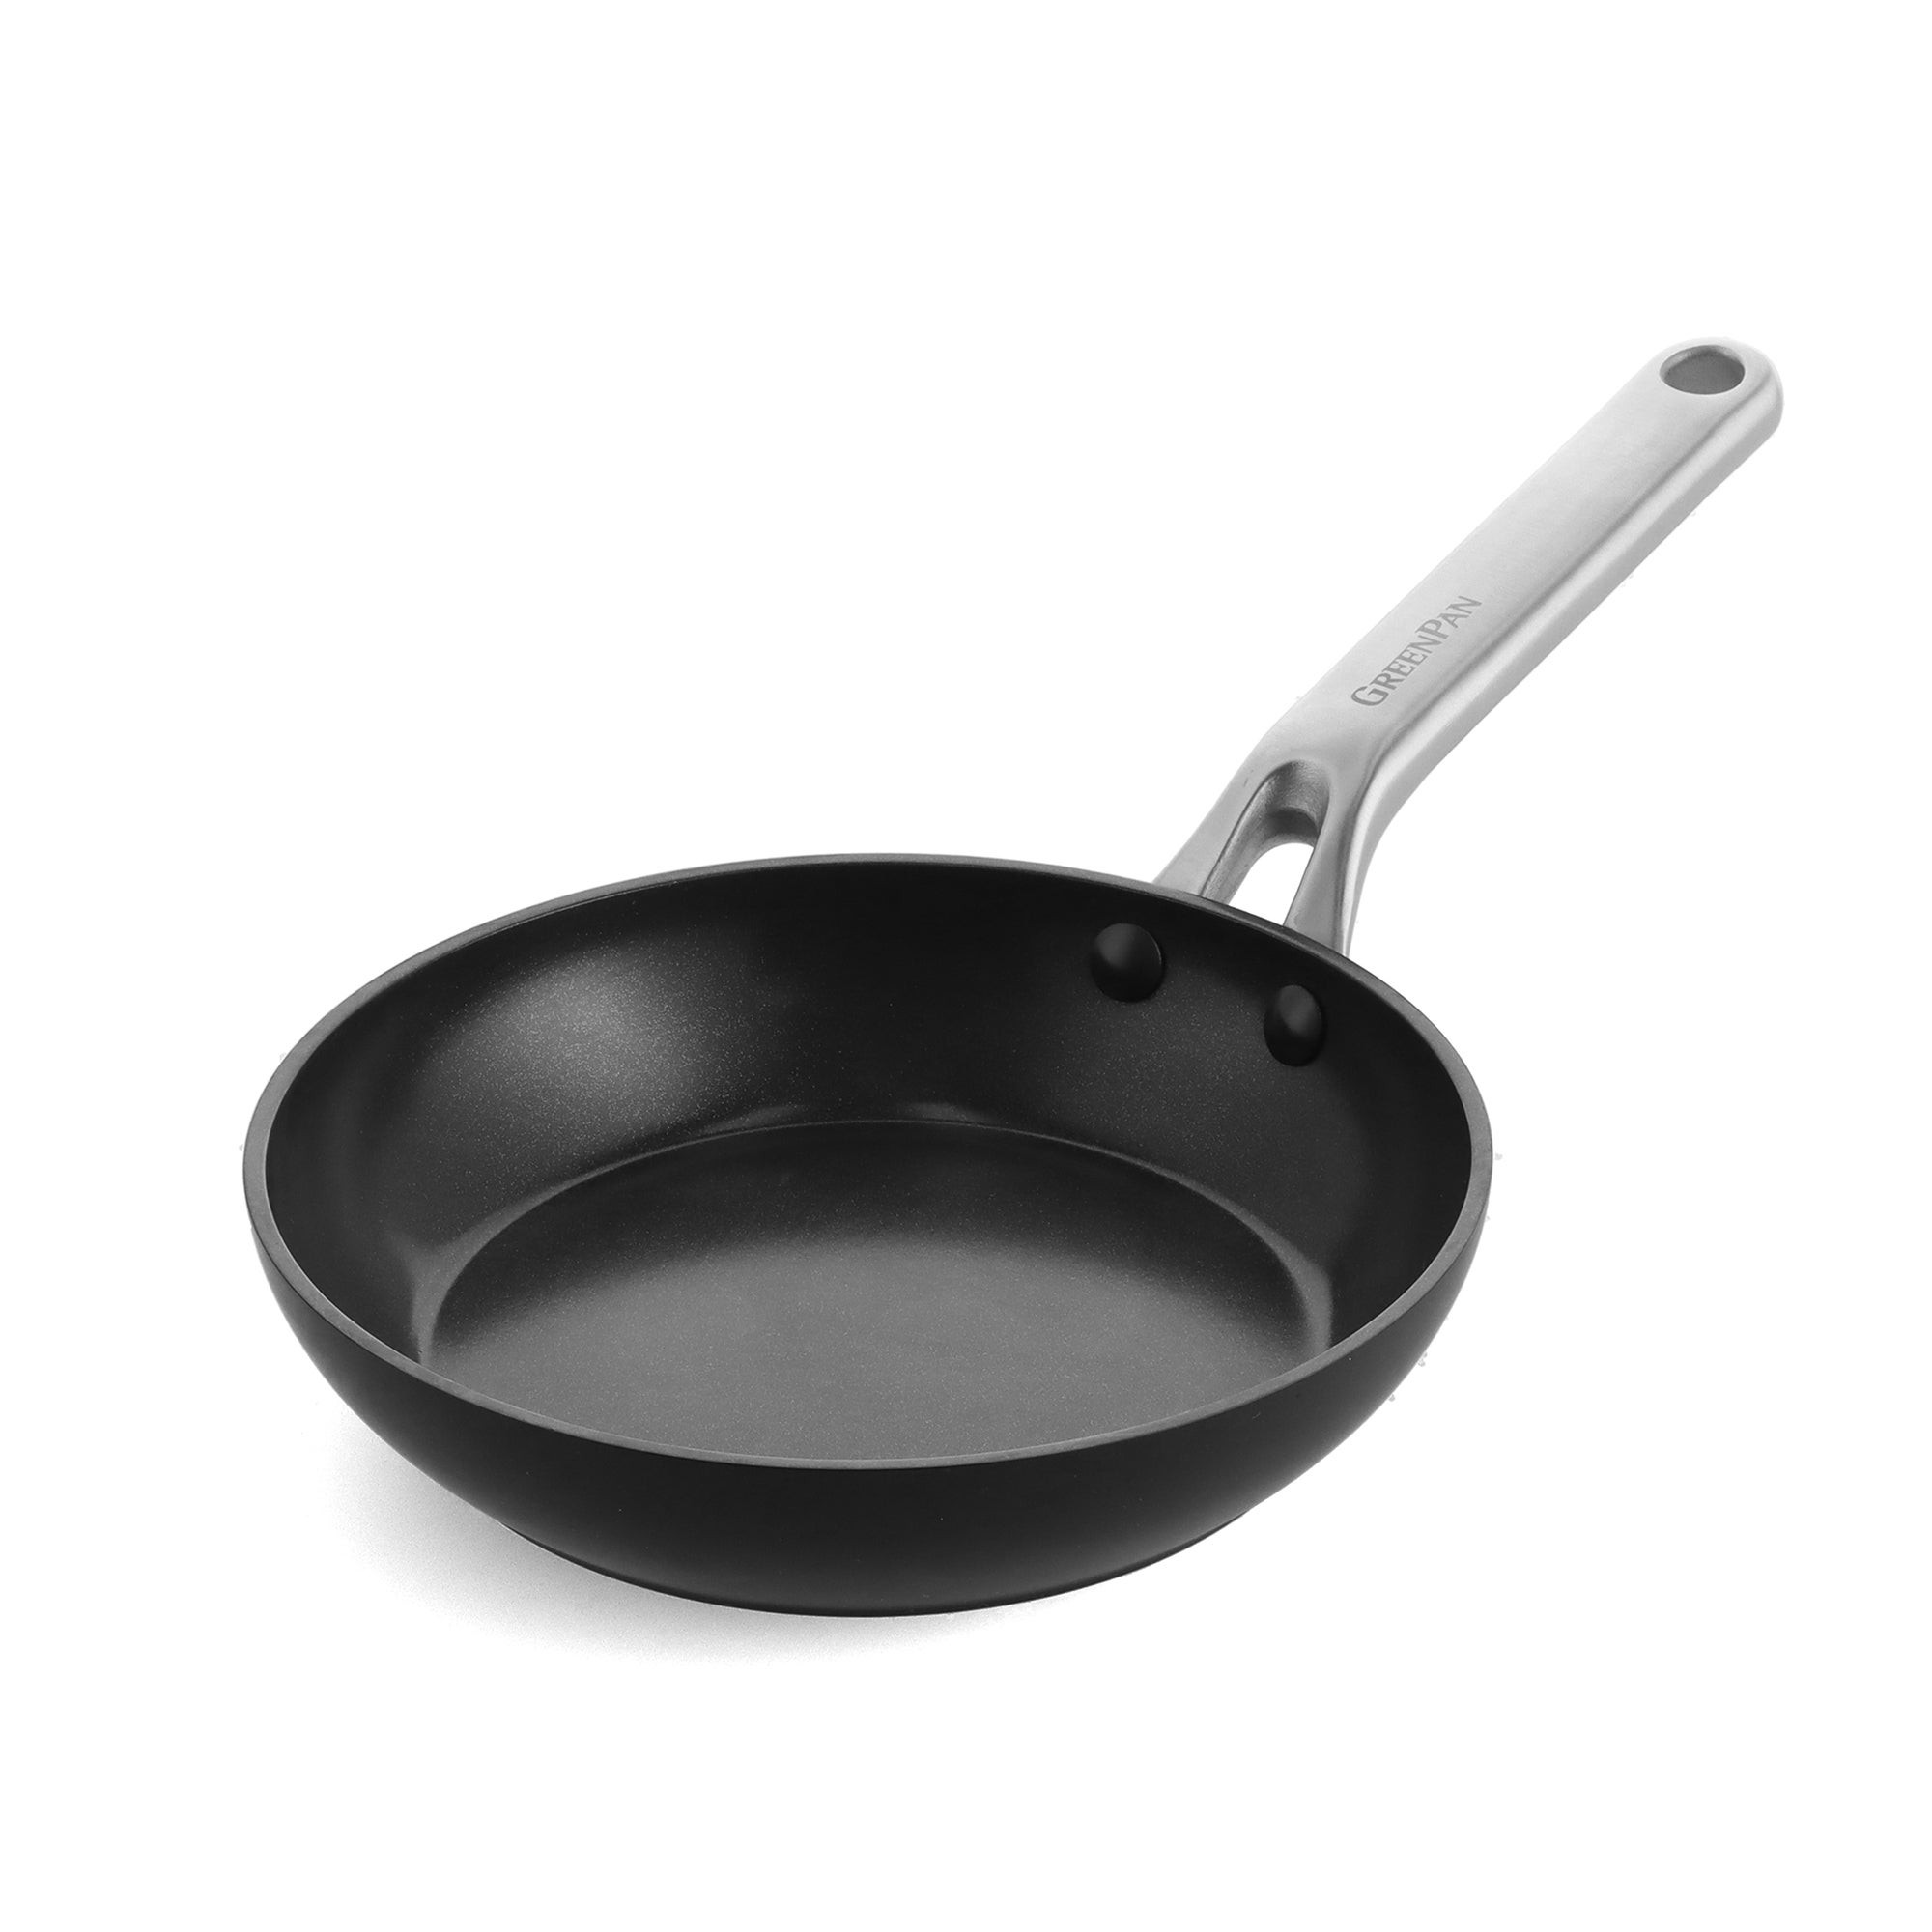 8" Omega Advanced Healthy Hard Anodized Ceramic Nonstick Fry Pan